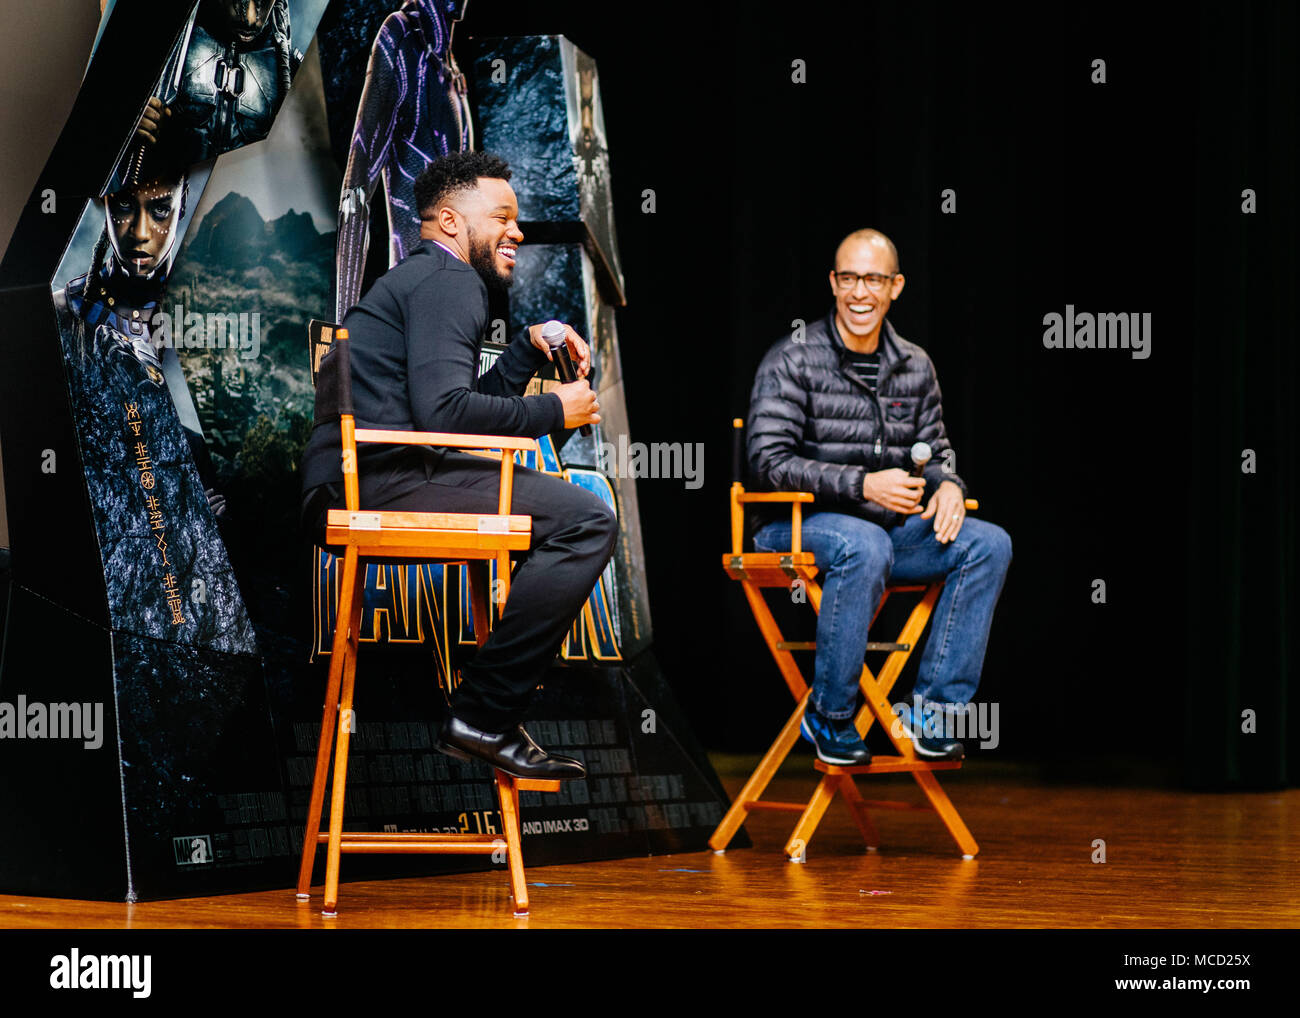 “Black Panther” director Ryan Coogler, left, and executive producer Nate Moore speak with audience members during a Q&A session at the theater on Joint Base Andrews, Md., Feb. 11, 2018. The duo facilitated a free military appreciation showing after the Q&A session as a way to give back to service members and their families. (U.S. Air Force photo by Senior Airman Delano Scott) Stock Photo